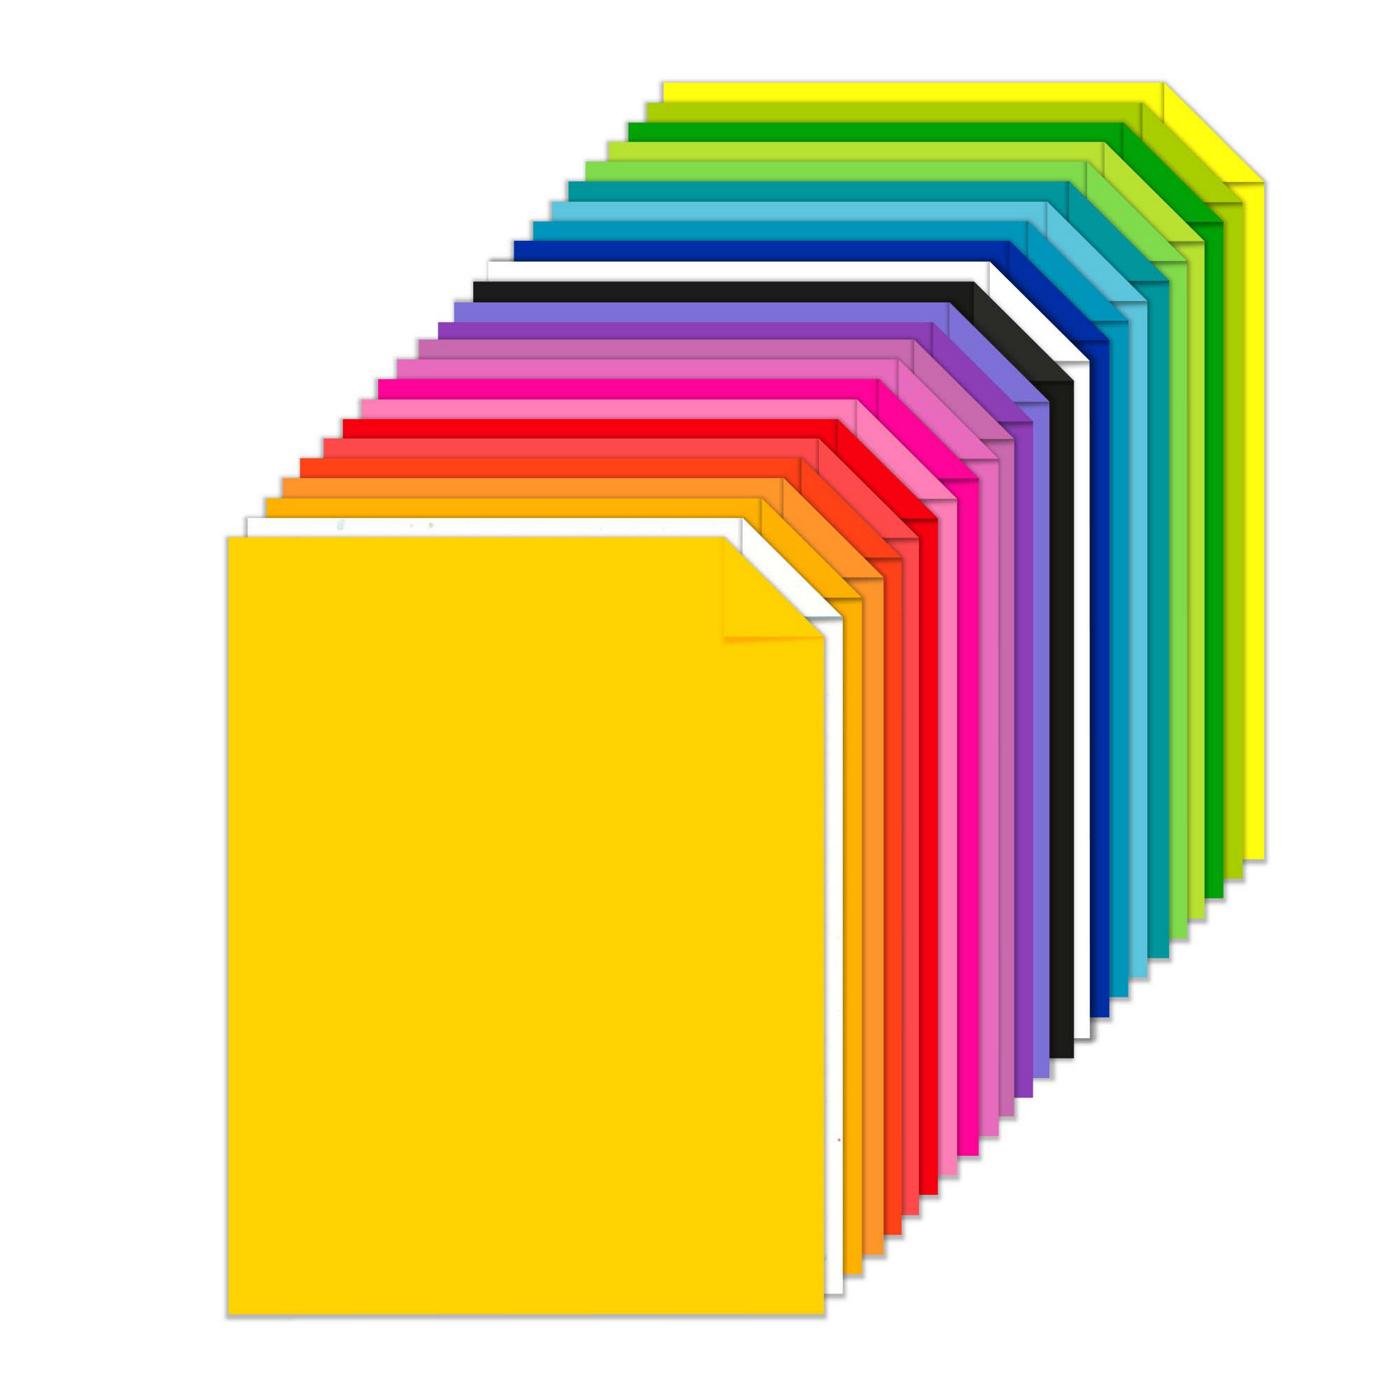 Neenah Astrobrights Colored Cardstock Paper - Shop Copy Paper at H-E-B